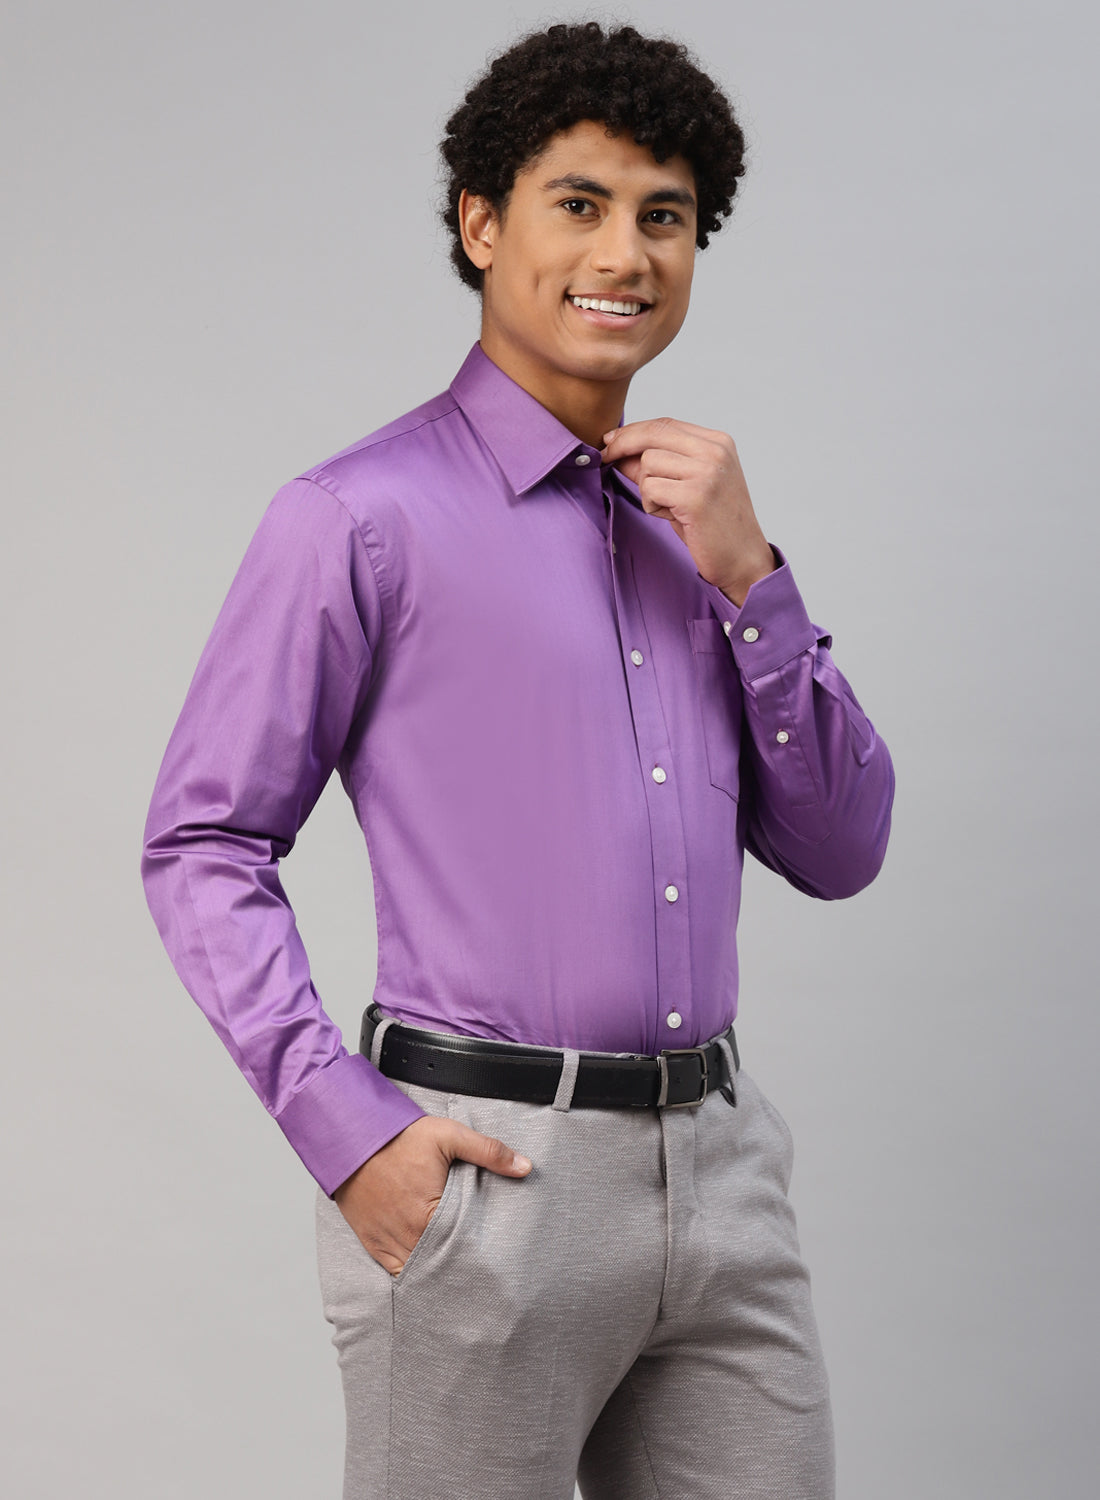 Men's Purple Shirt With Long Sleeves And Black Pants Isolated On White  Background. Fashion Clothes Stock Photo, Picture and Royalty Free Image.  Image 151089390.